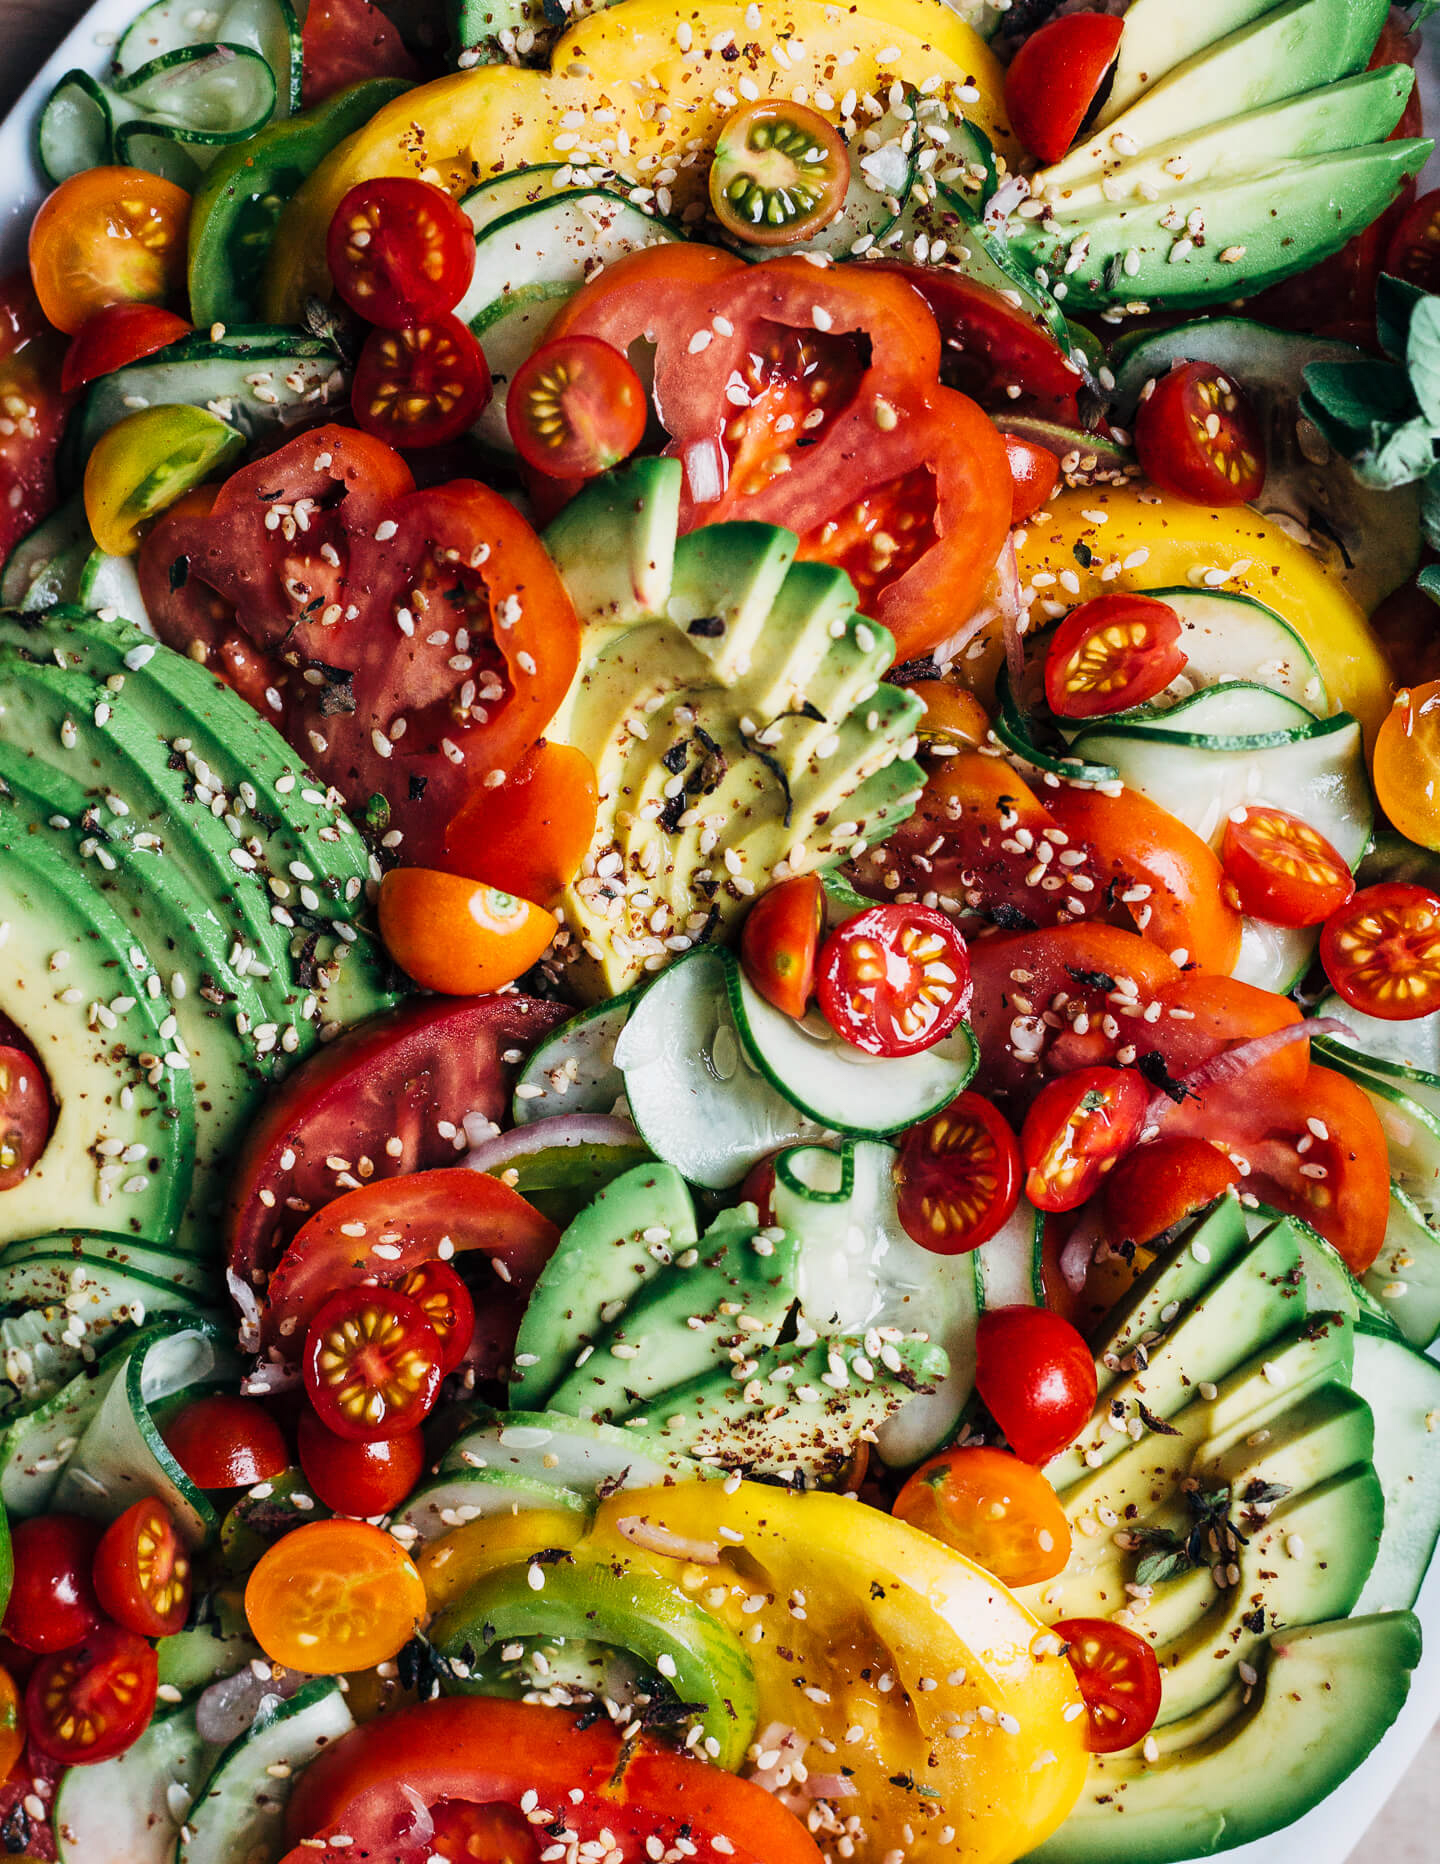 A close view of an avocado and tomato salad.